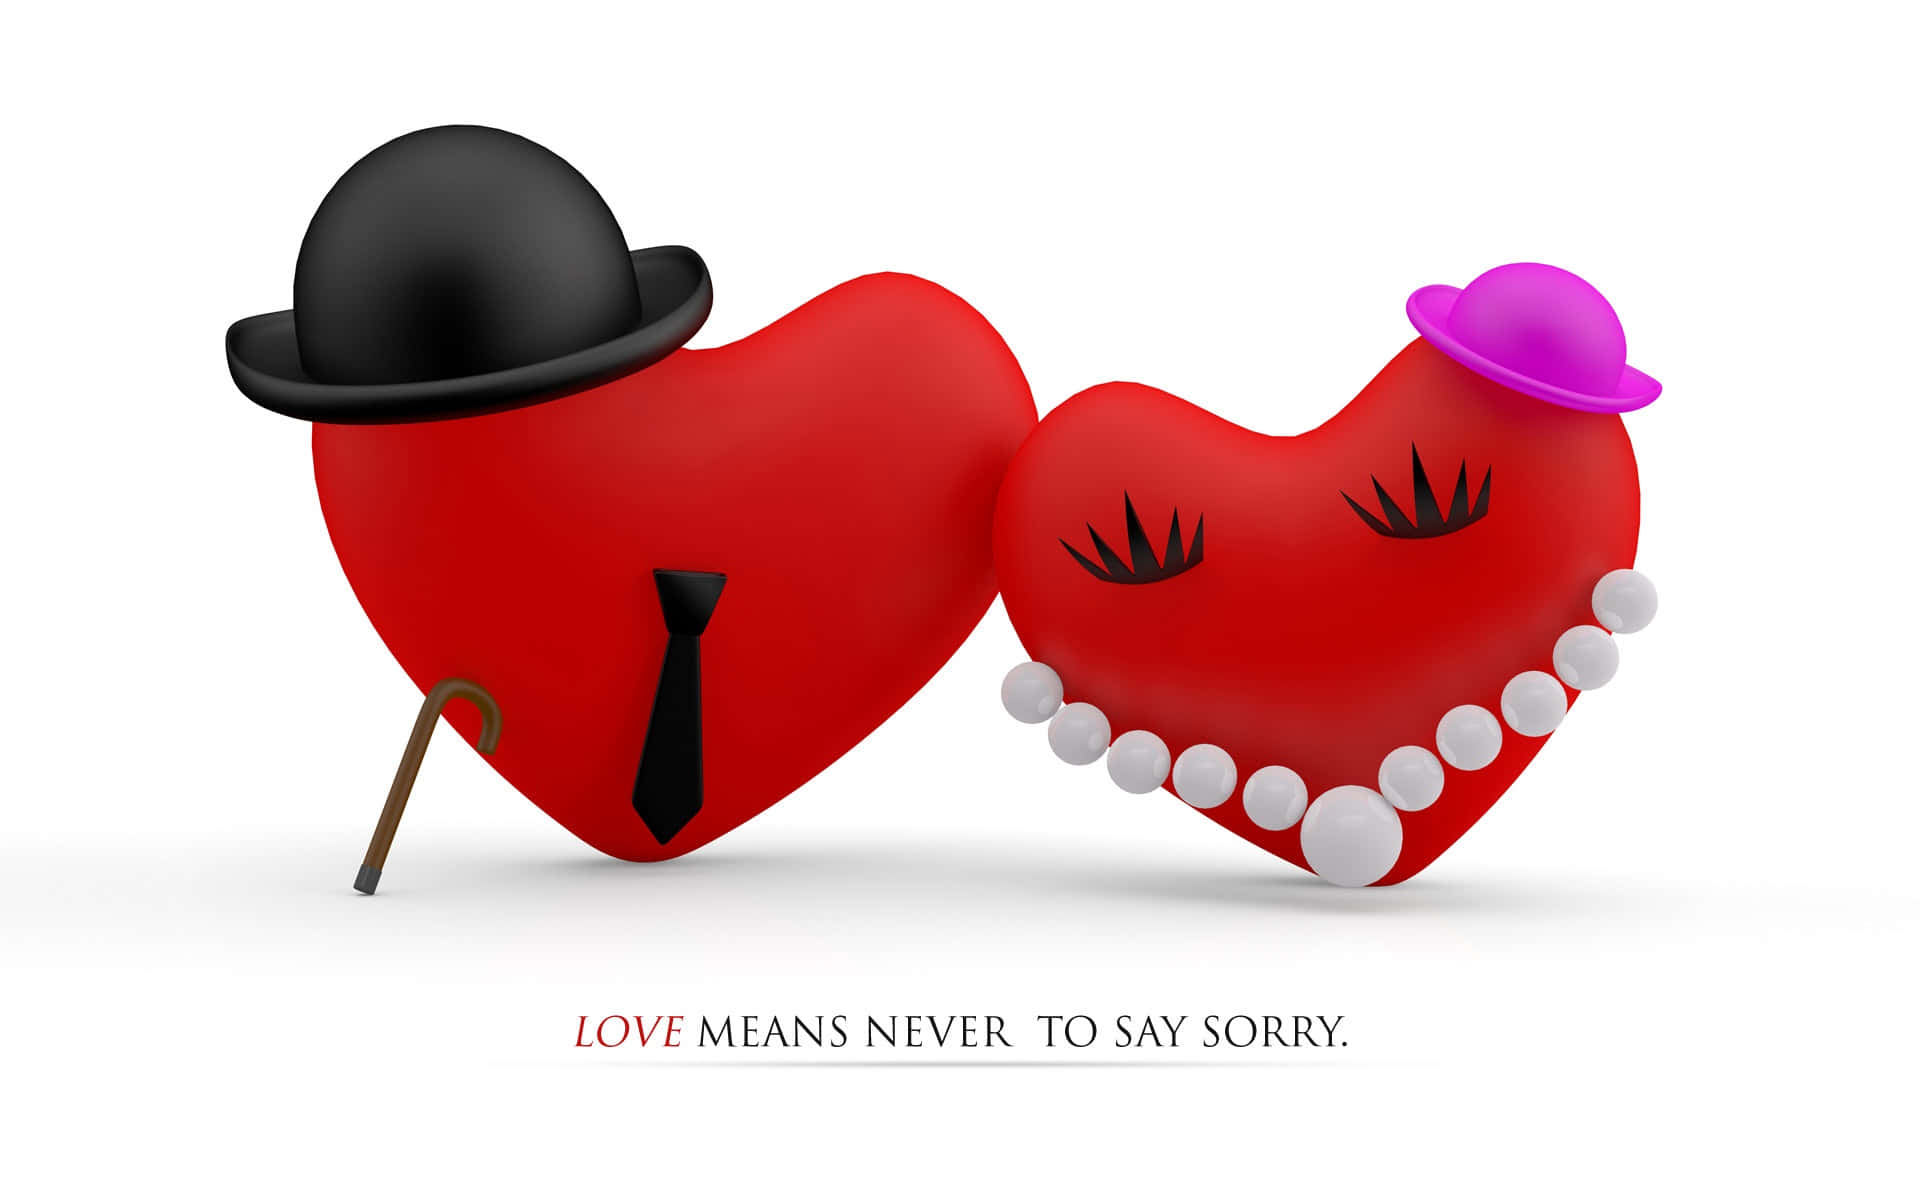 cute funny love wallpapers